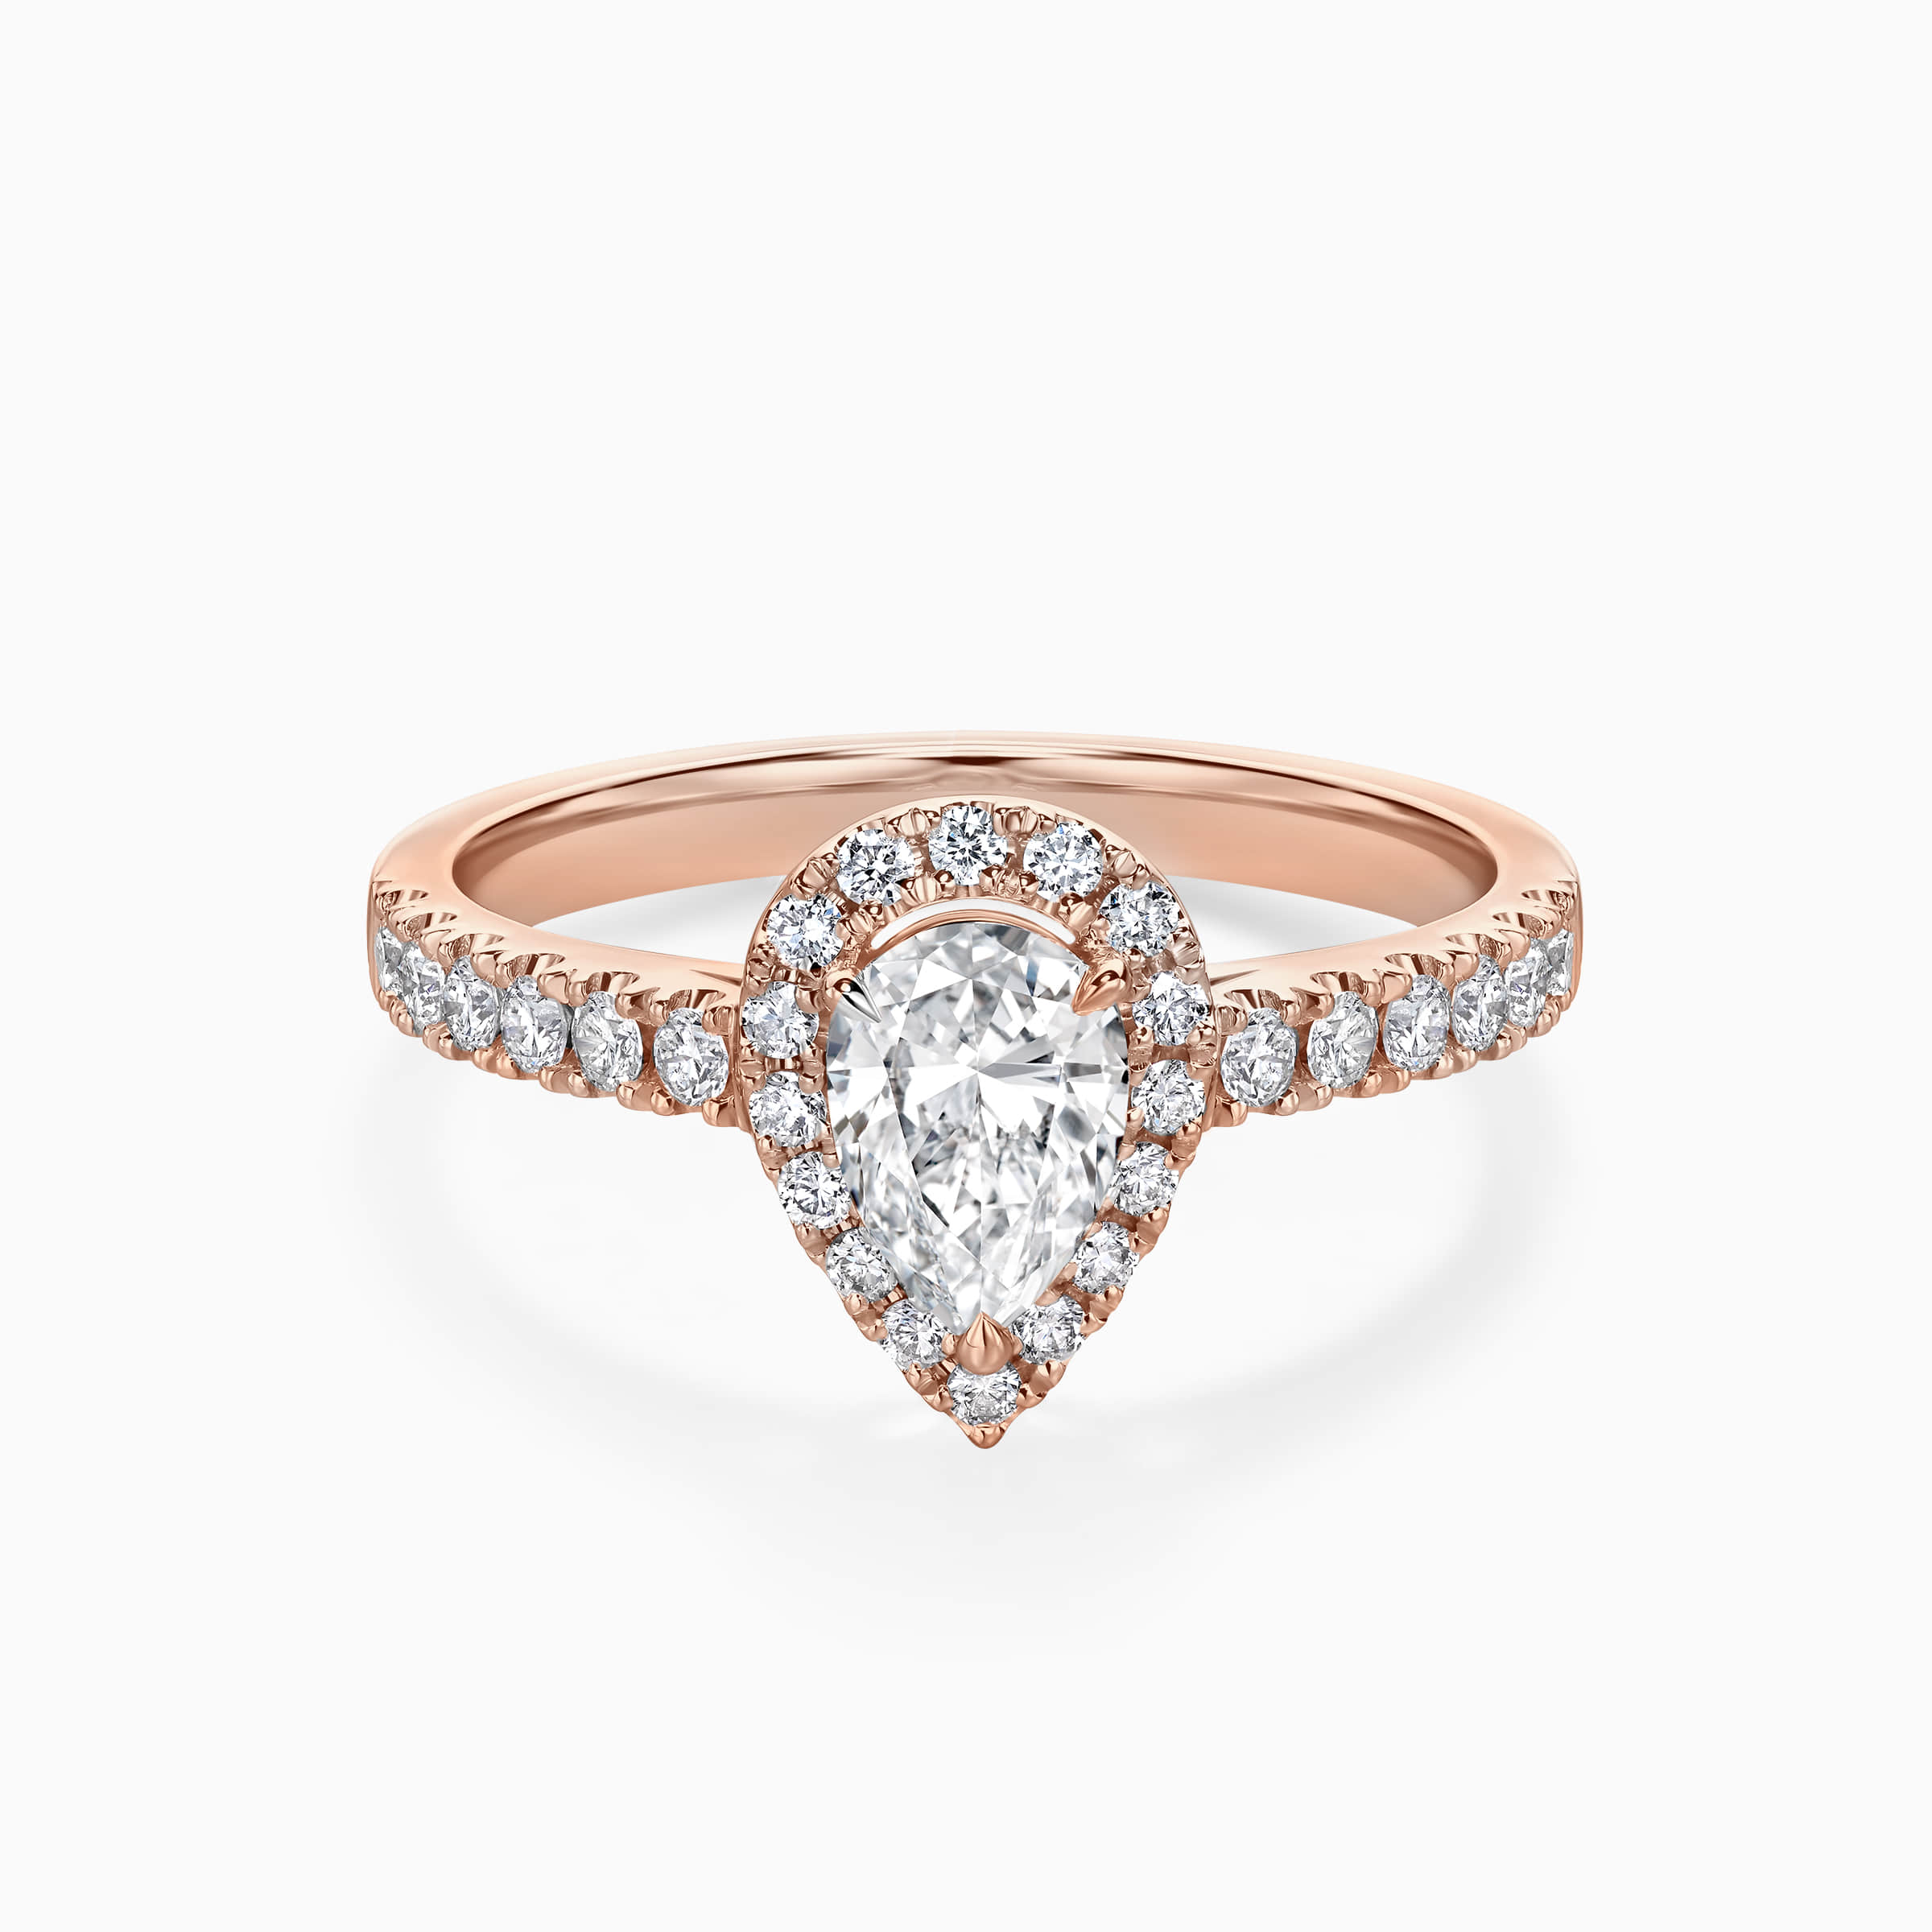 Darry Ring teardrop engagement ring in rose gold